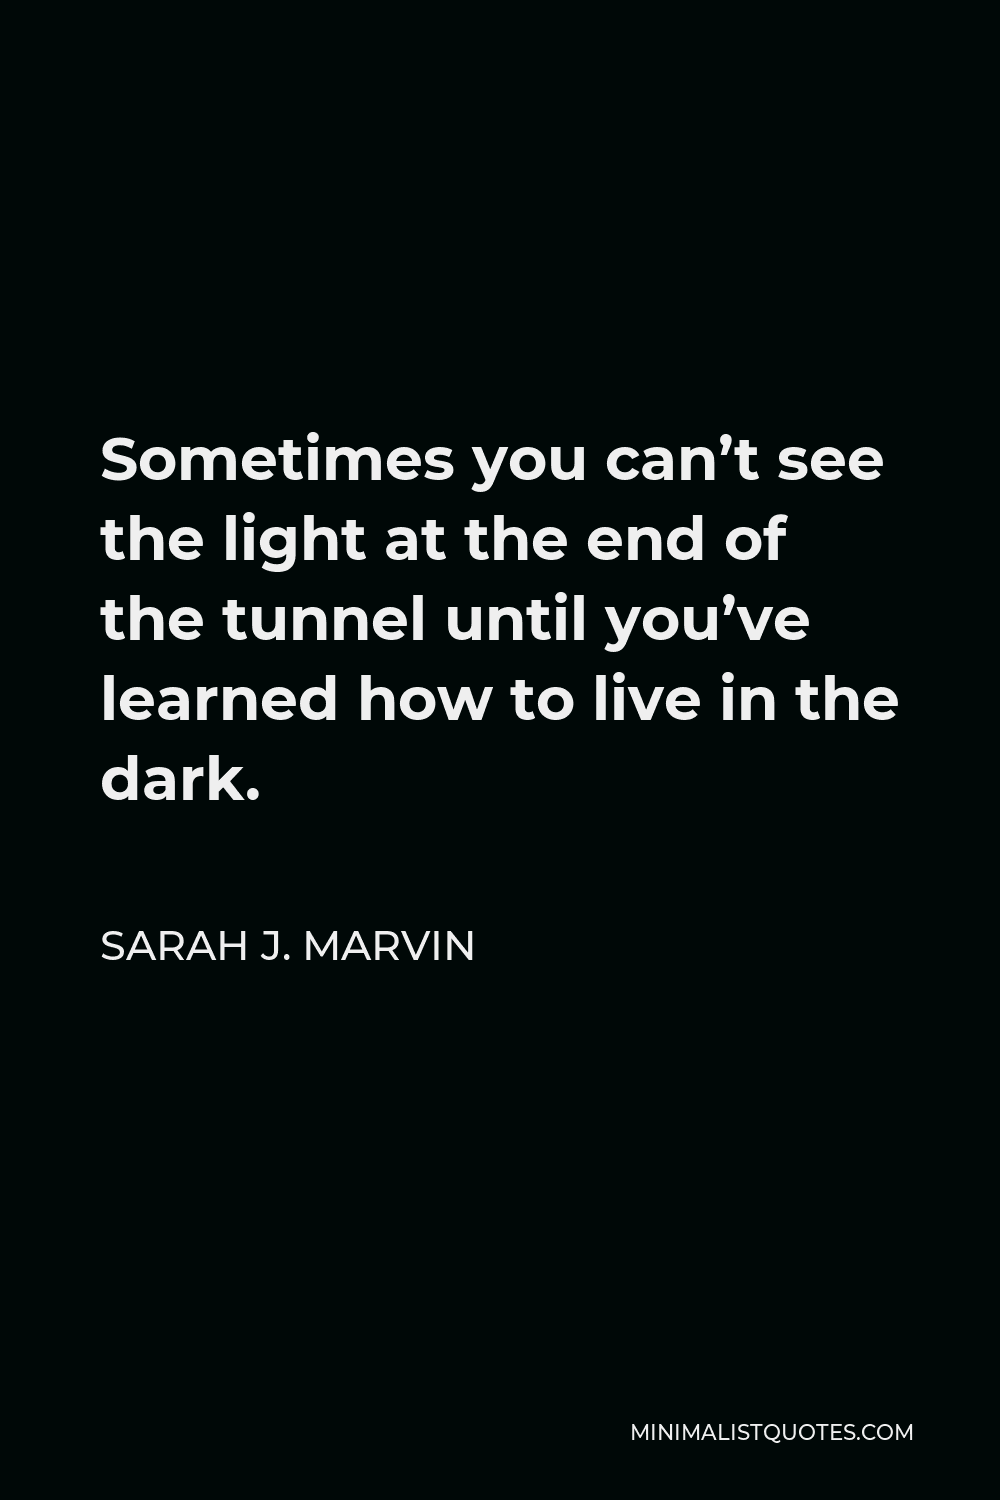 Sarah J. Marvin Quote - Sometimes you can’t see the light at the end of the tunnel until you’ve learned how to live in the dark.